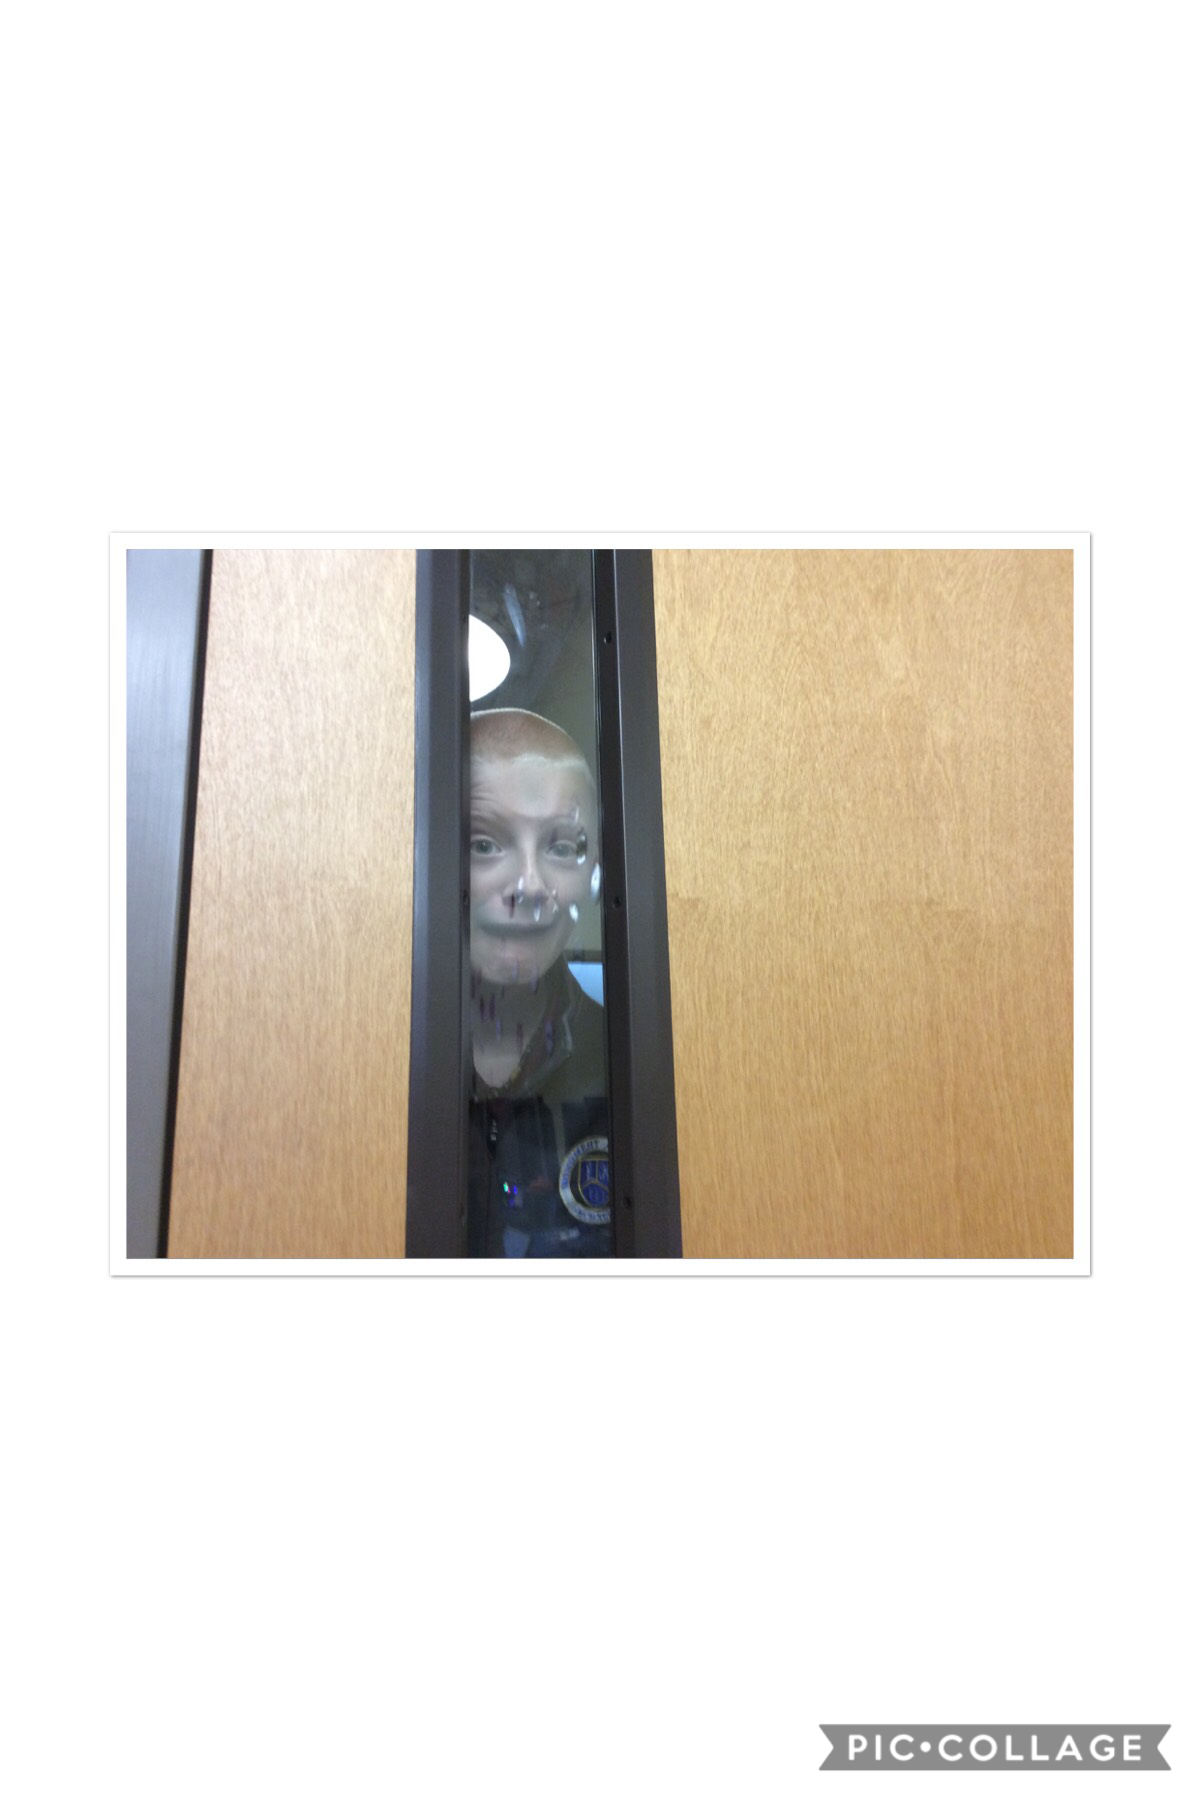 Peyton when everyone in the class is eating candy, but he is locked out.